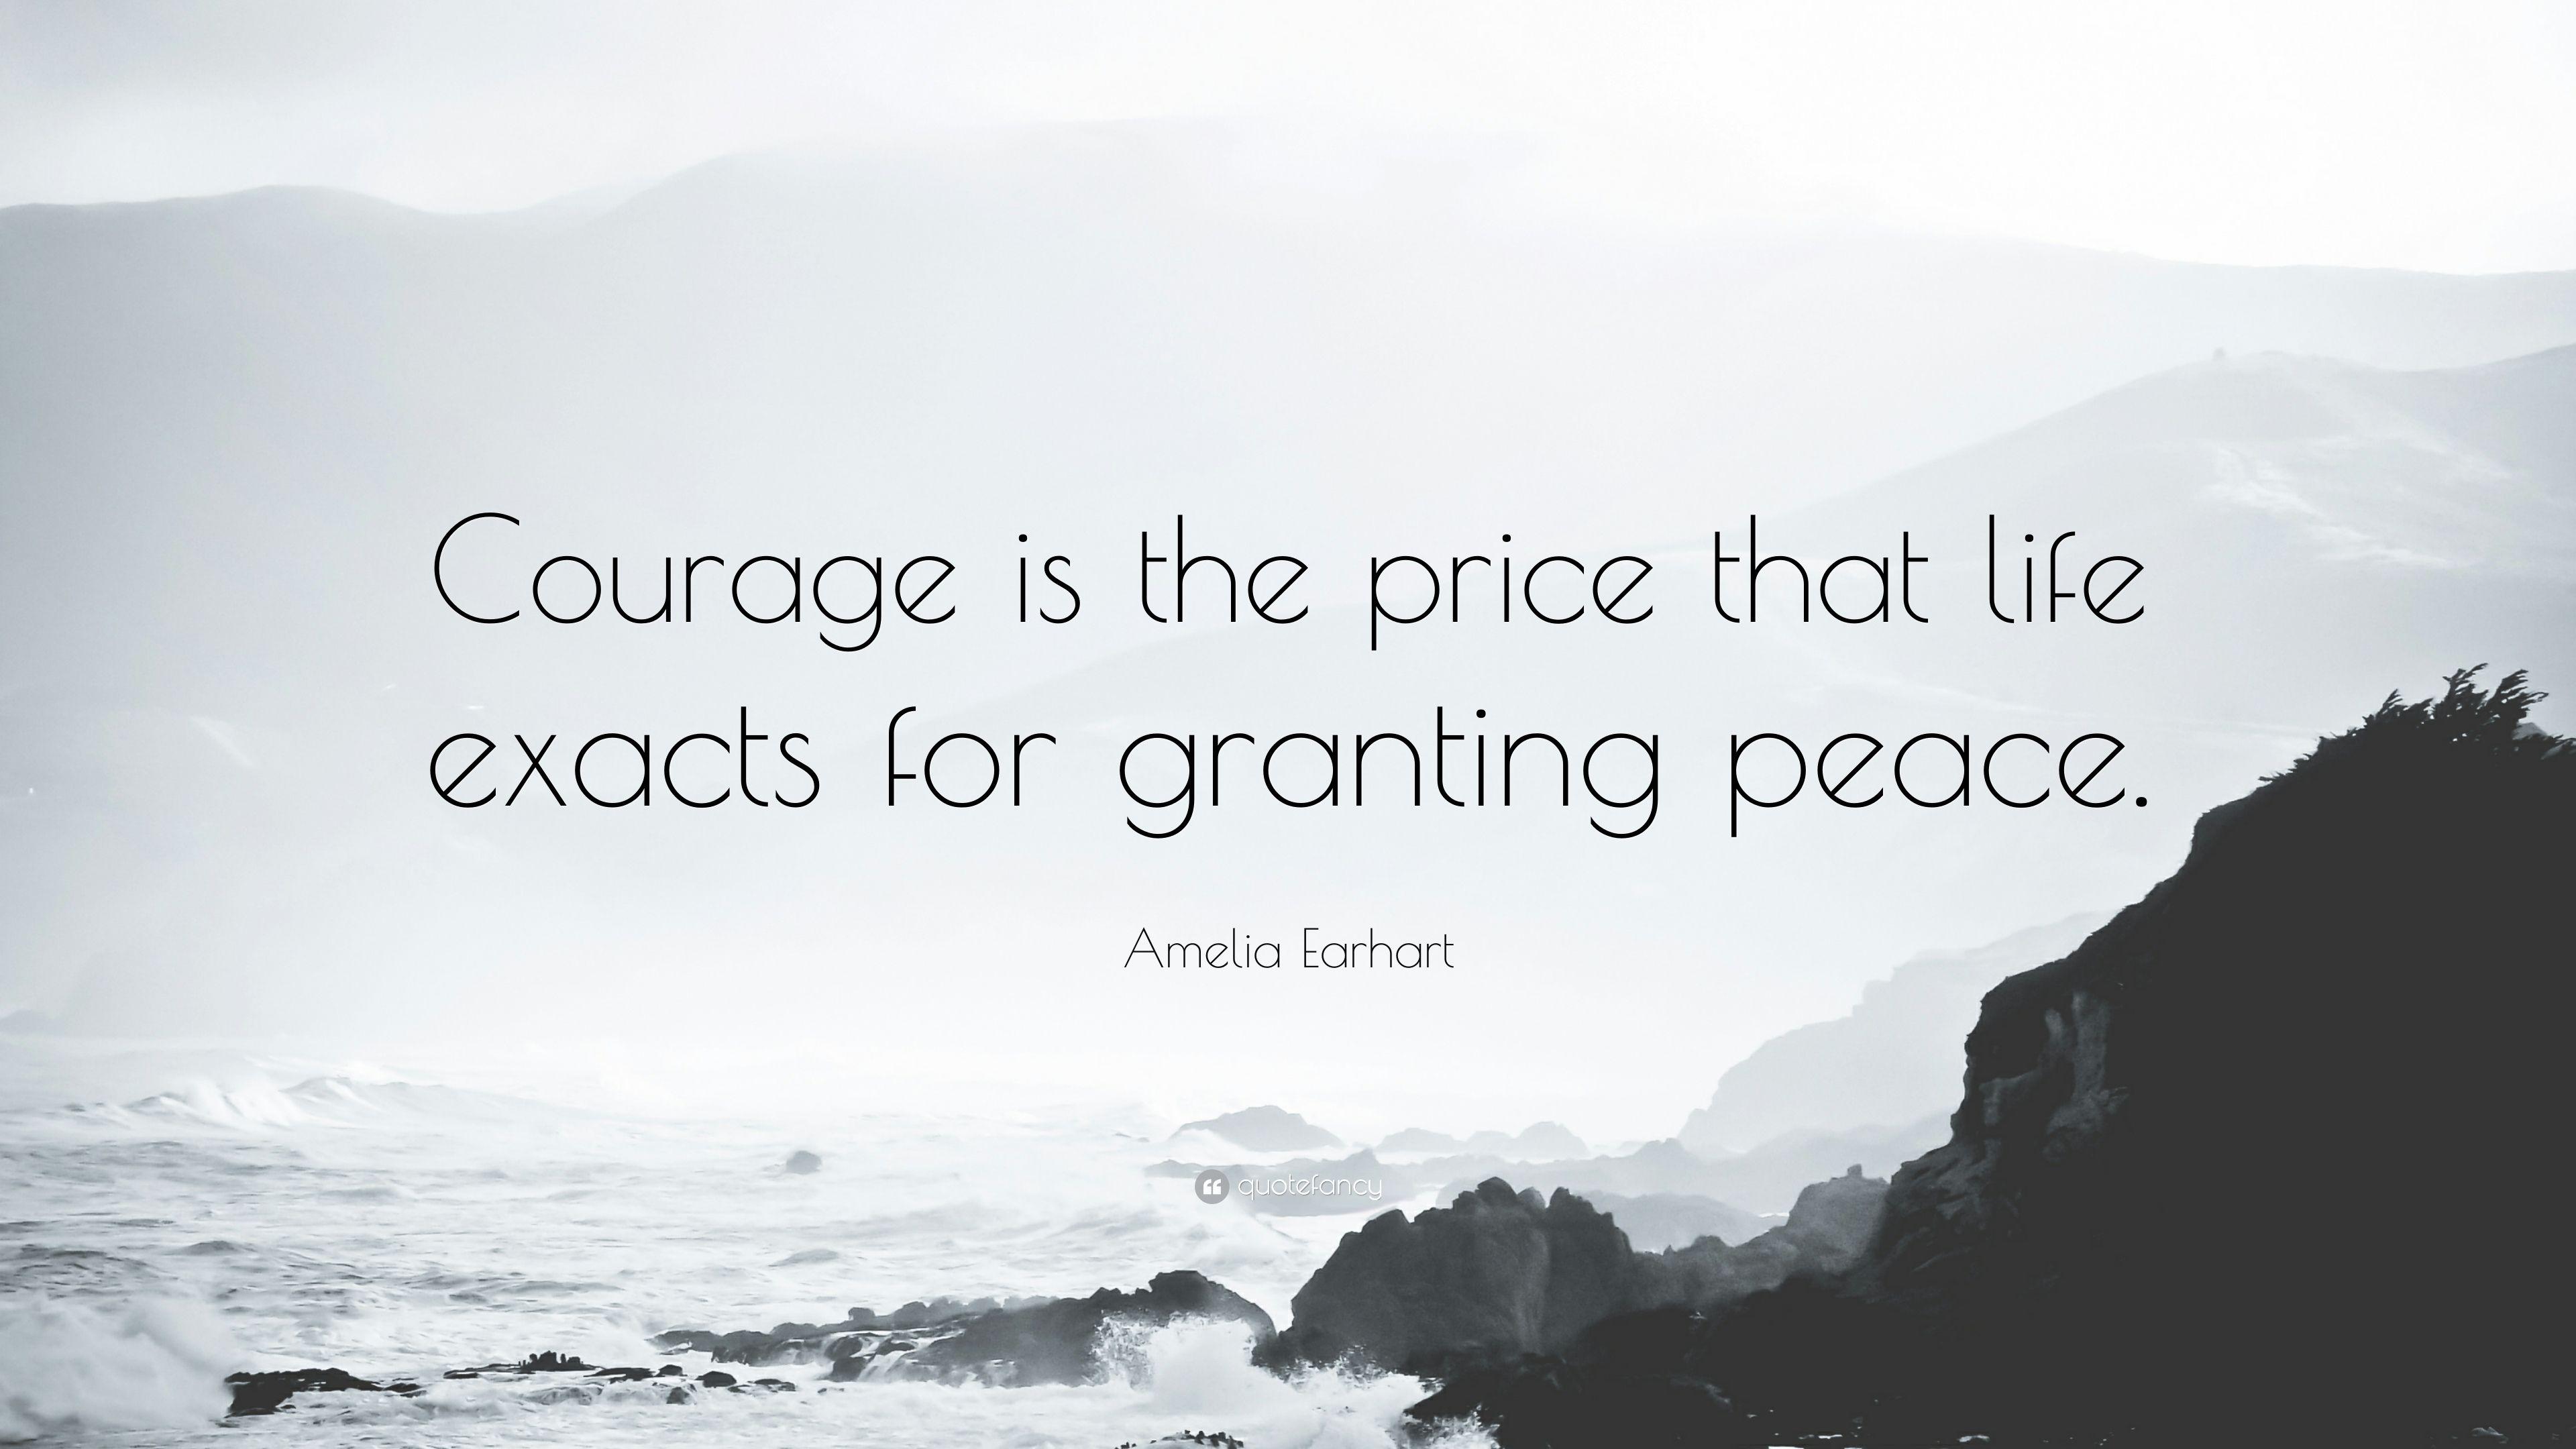 Amelia Earhart Quote: “Courage is the price that life exacts